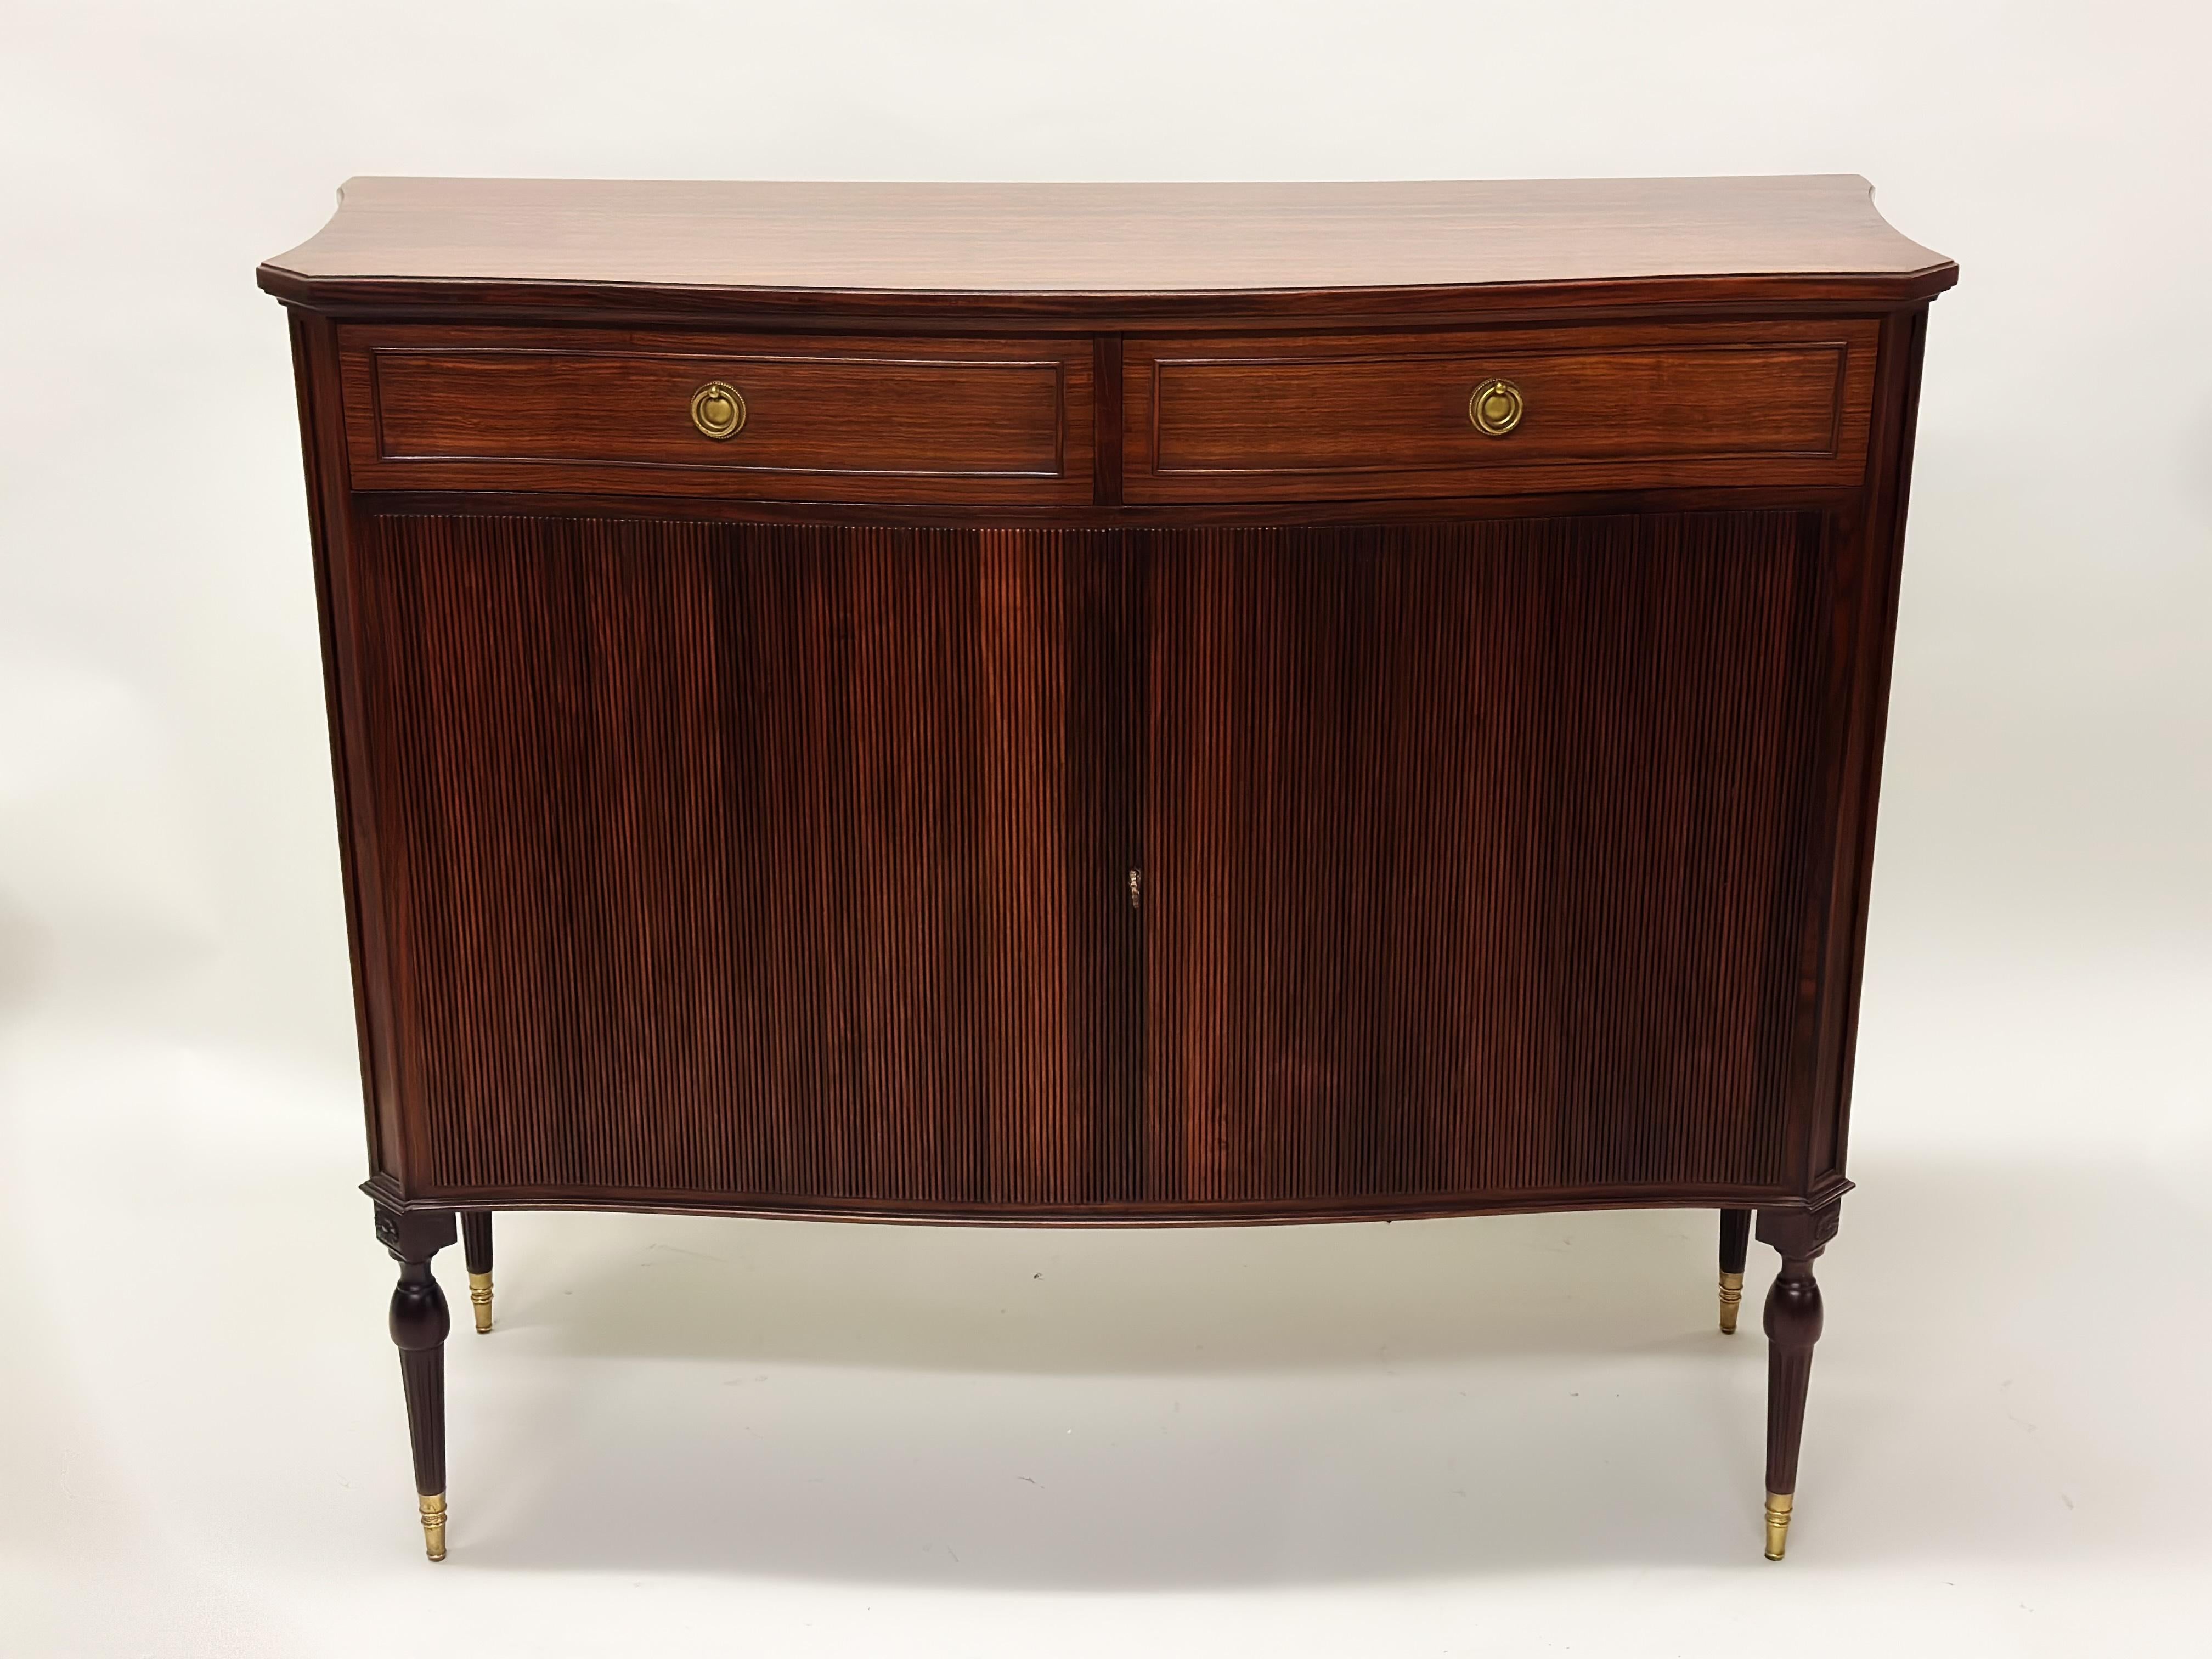 20th Century Italian Mid-Century Modern Neoclassical Walnut Sideboards by Paolo Buffa For Sale